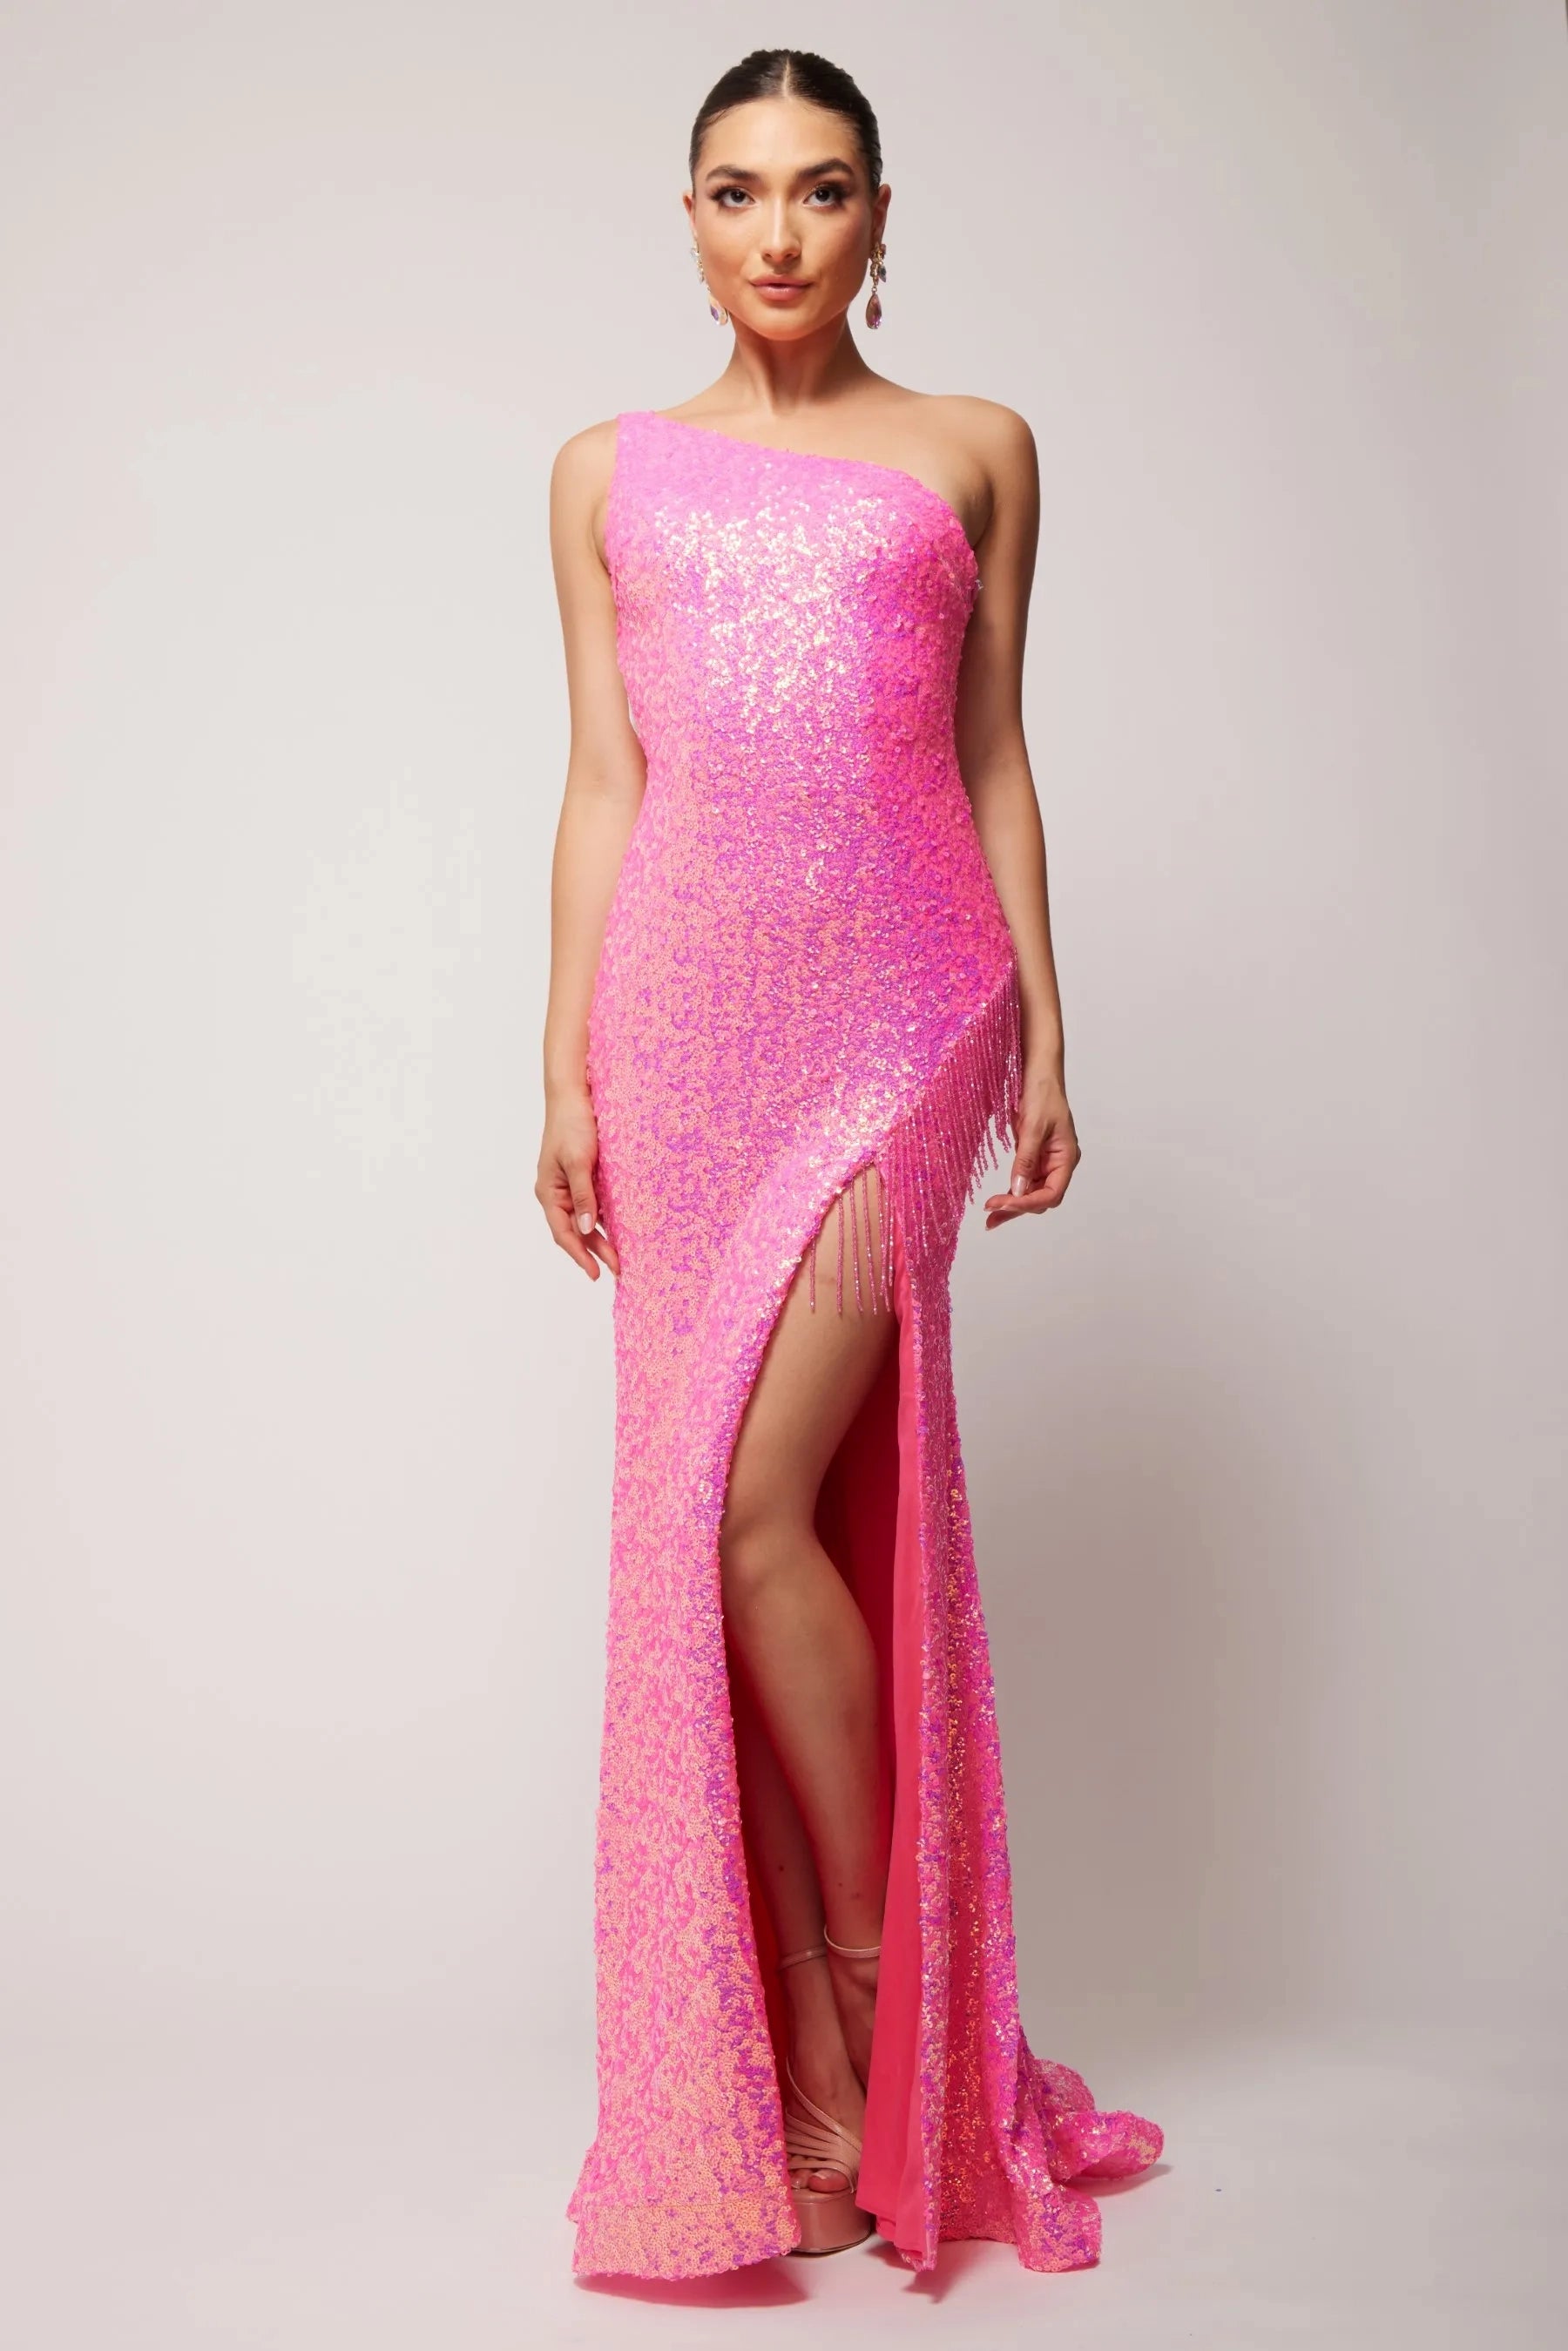 Vienna Prom Dress 8857 Fuchsia One Shoulder Evening Gown with Fringe Slit that Runs up the Side of the Dress to the Hip and Spaghetti Straps Down the Back